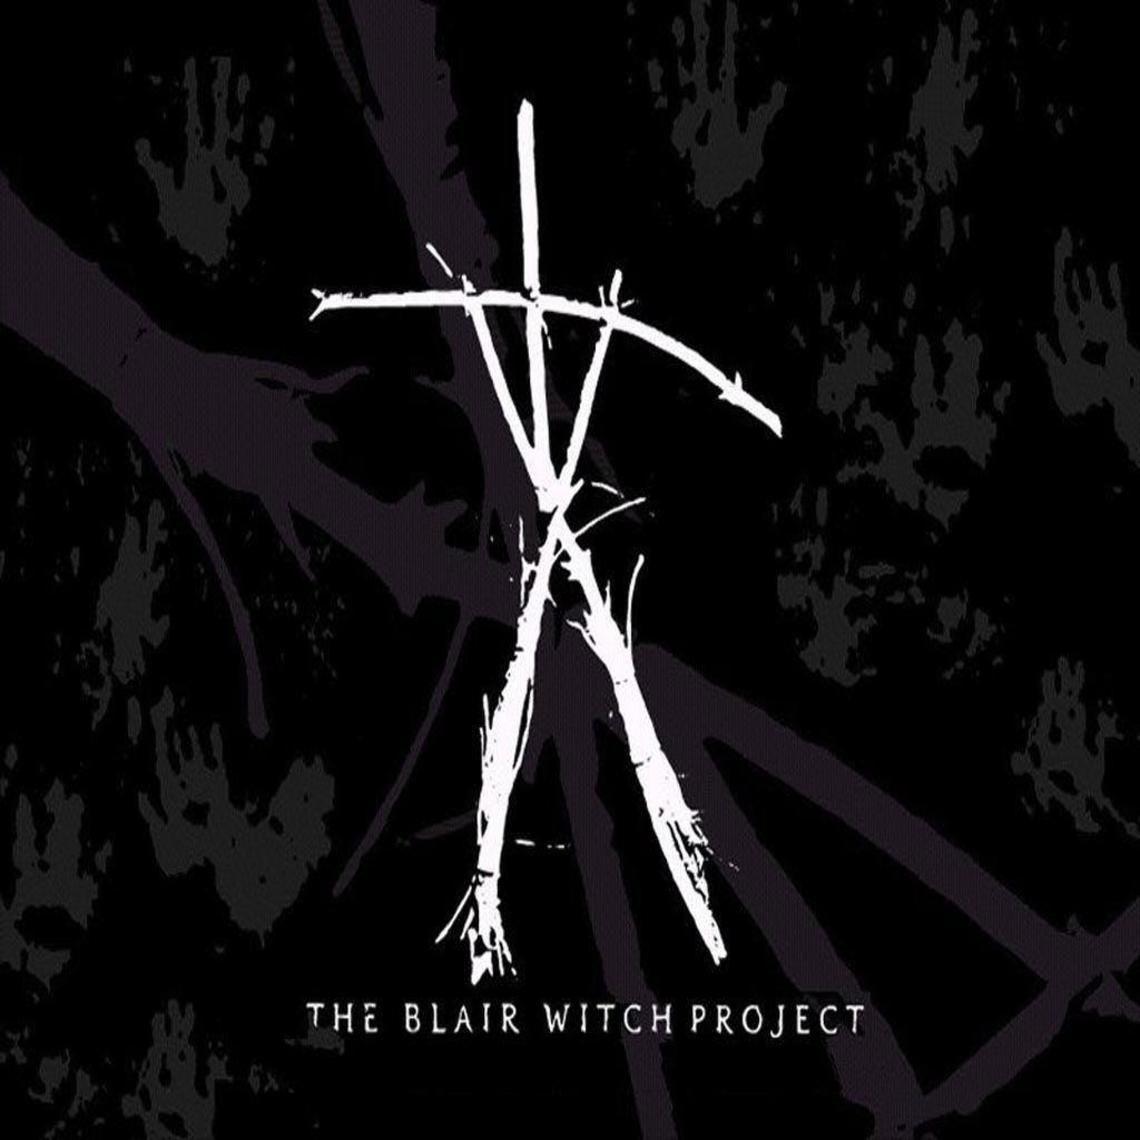 The Blair Witch Project Wallpaper. Blair